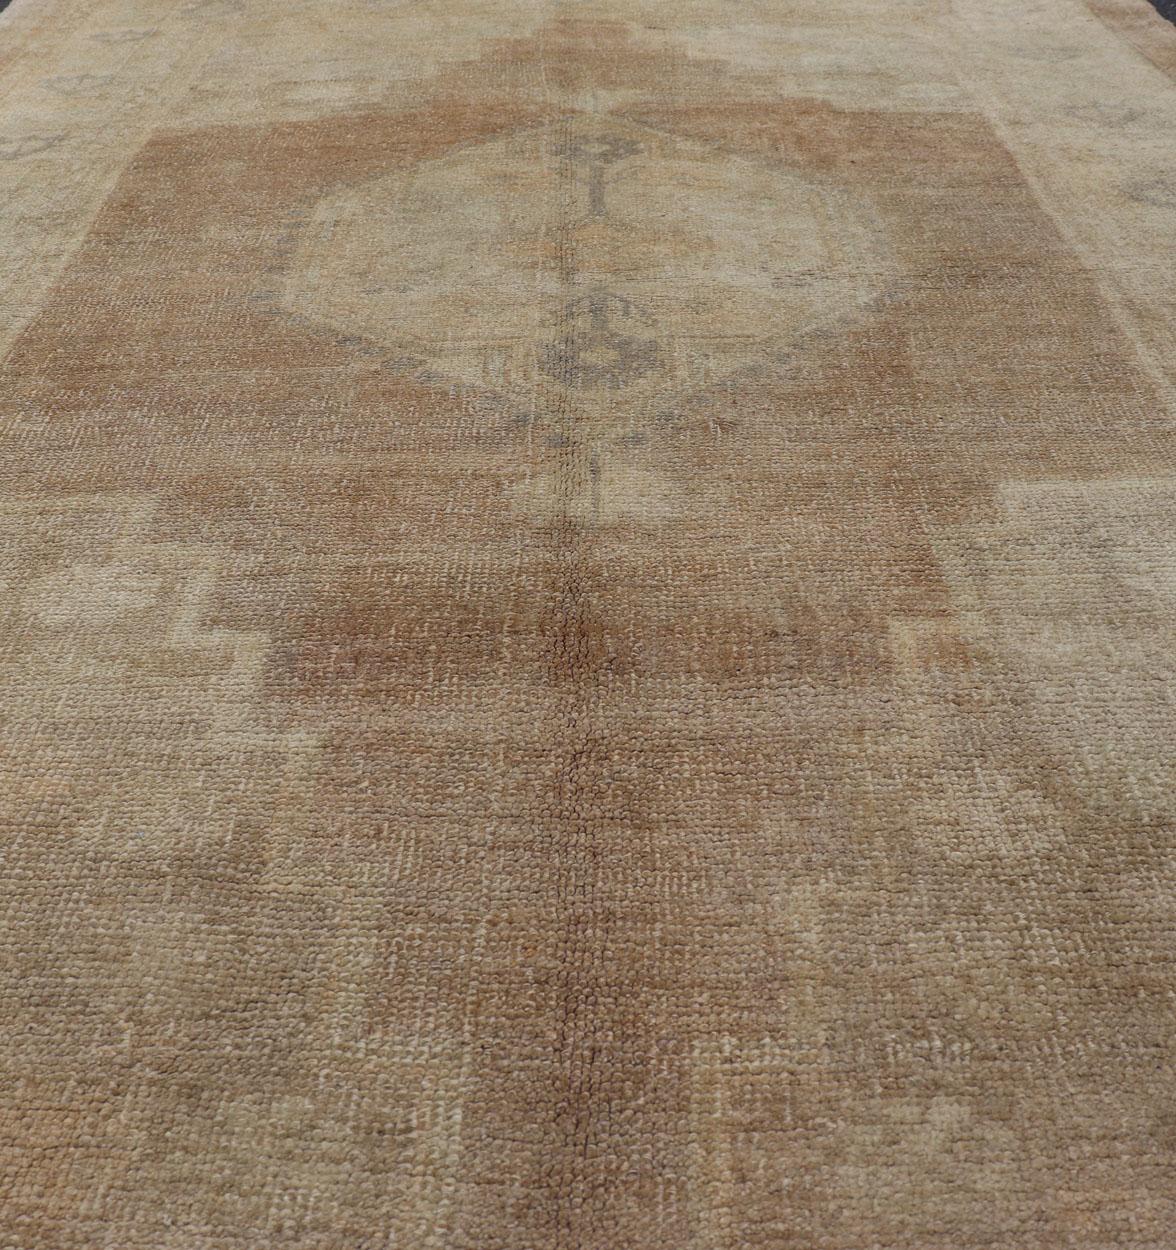 Vintage Oushak Rug Rug with Mocha Color and Pale Neutral Tones In Good Condition For Sale In Atlanta, GA